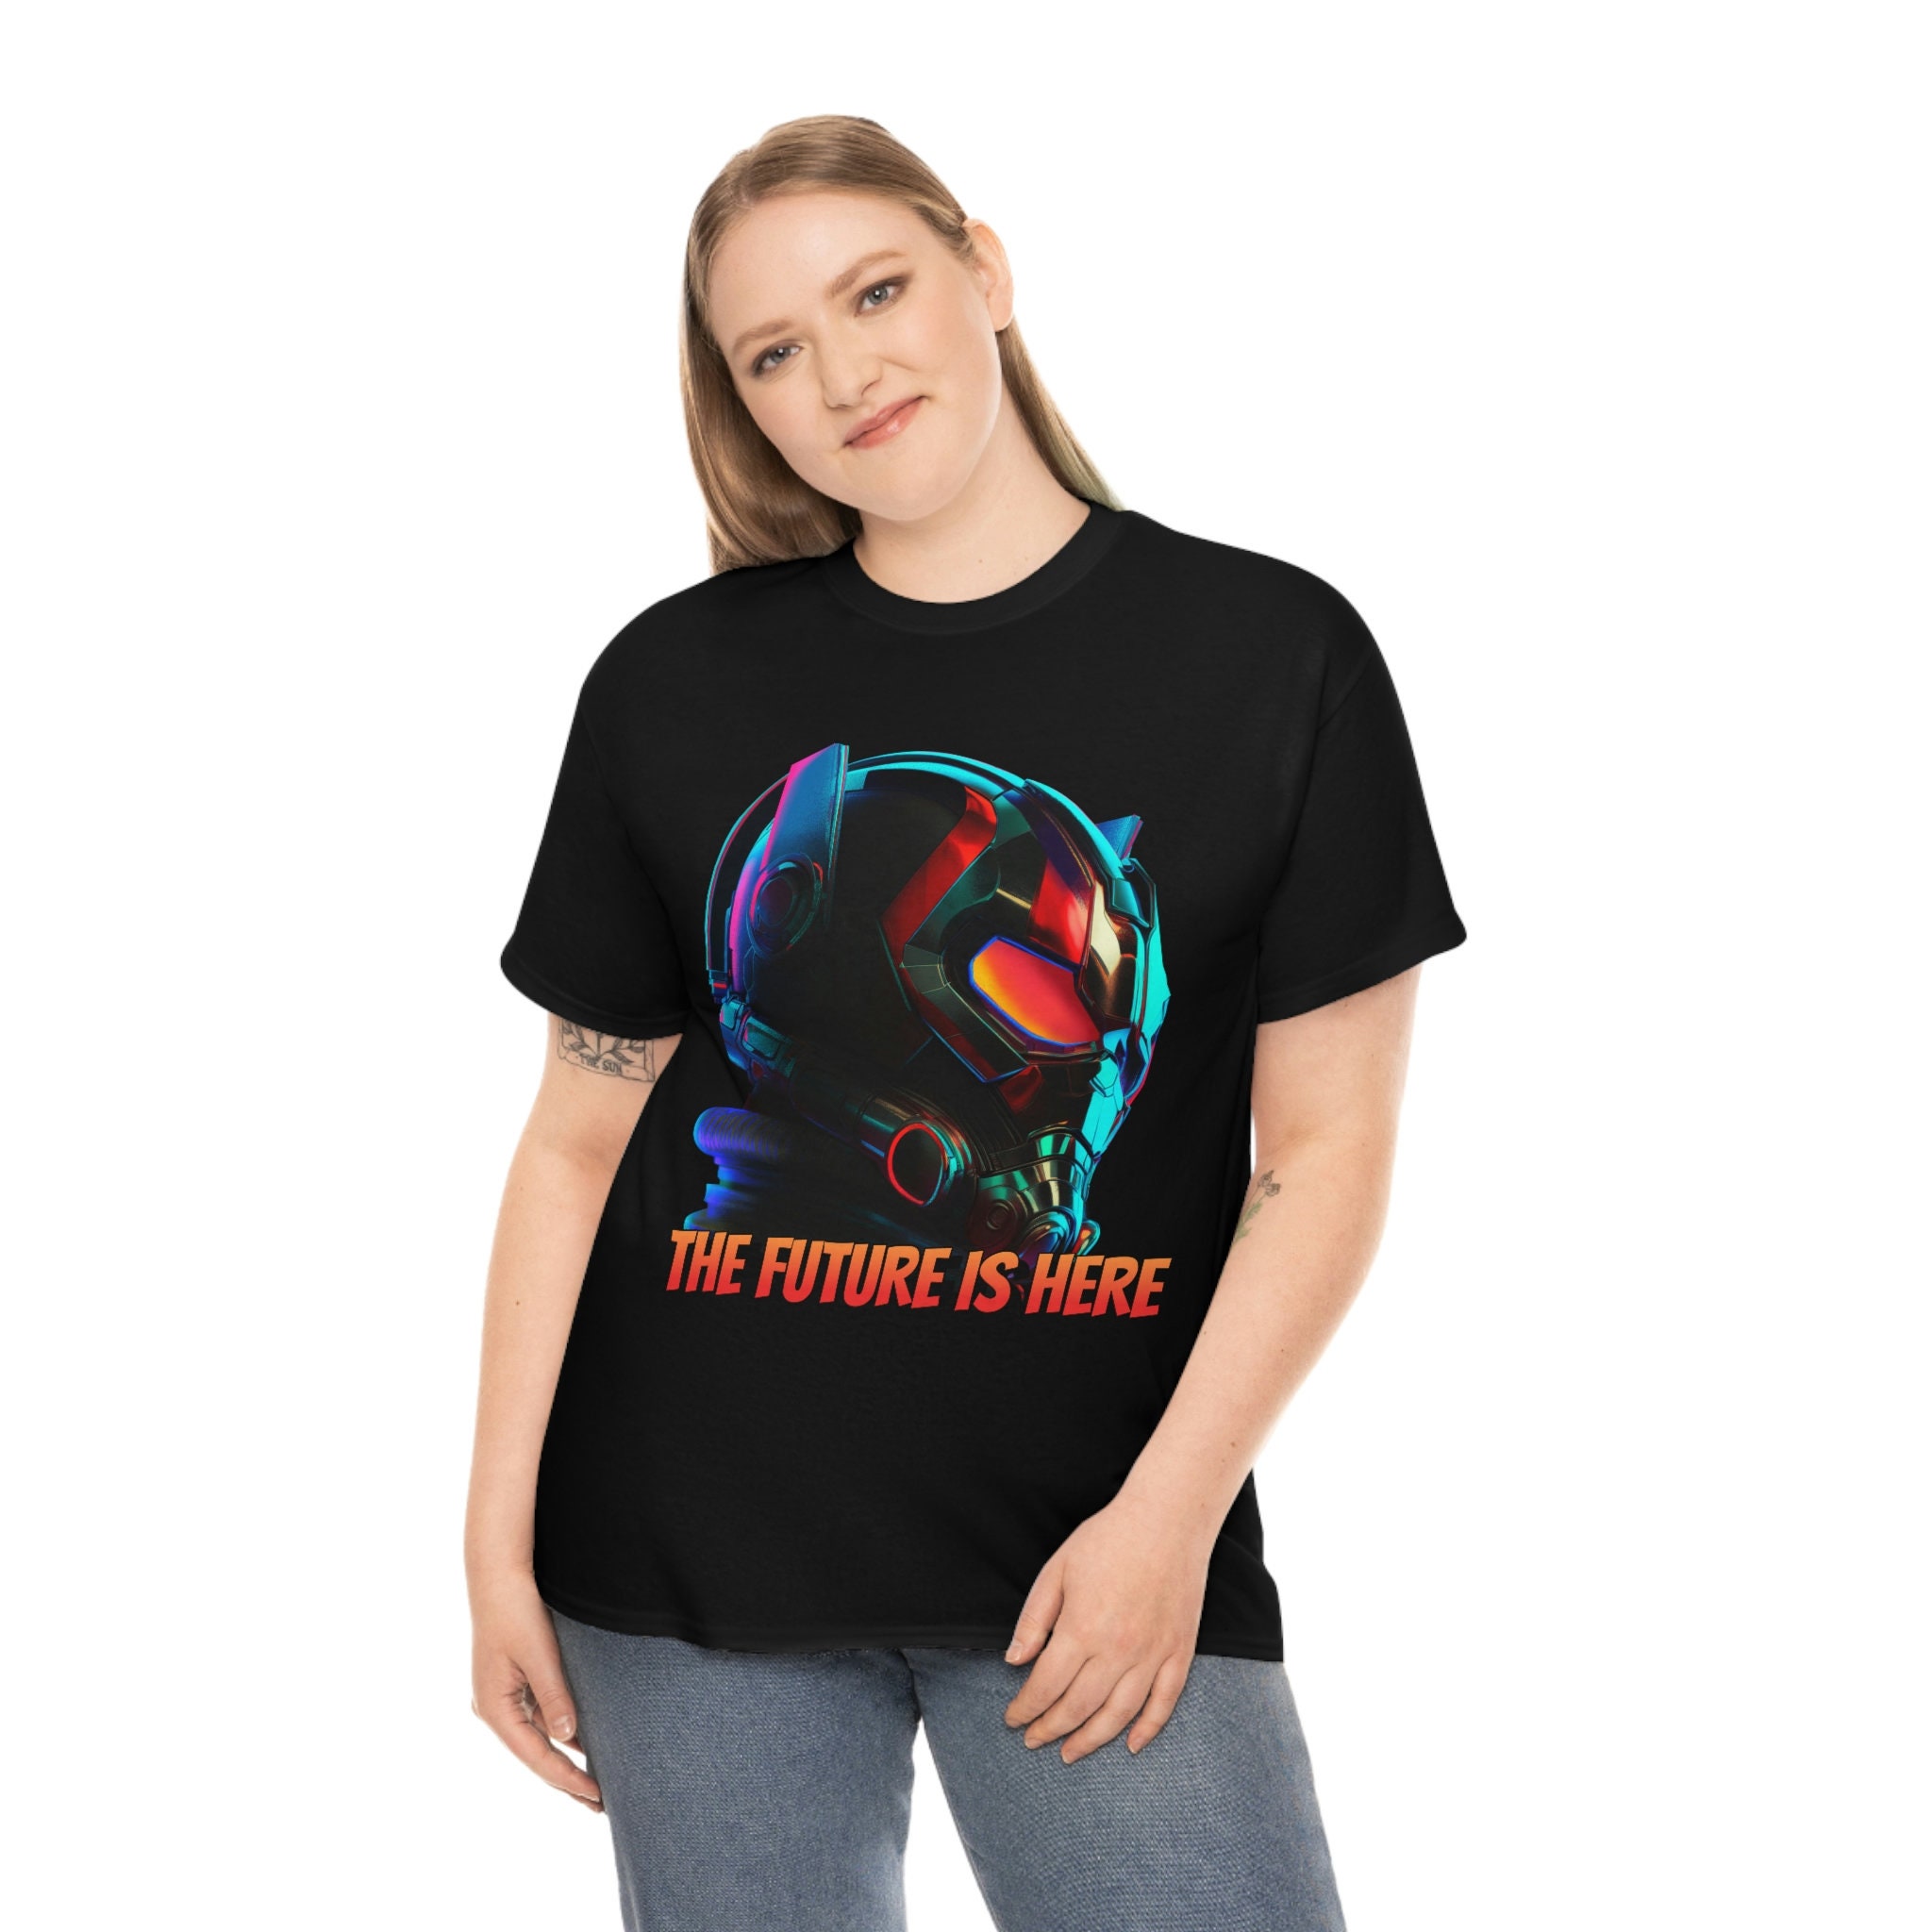 Discover The future is here black Unisex Heavy Cotton Tee t shirt